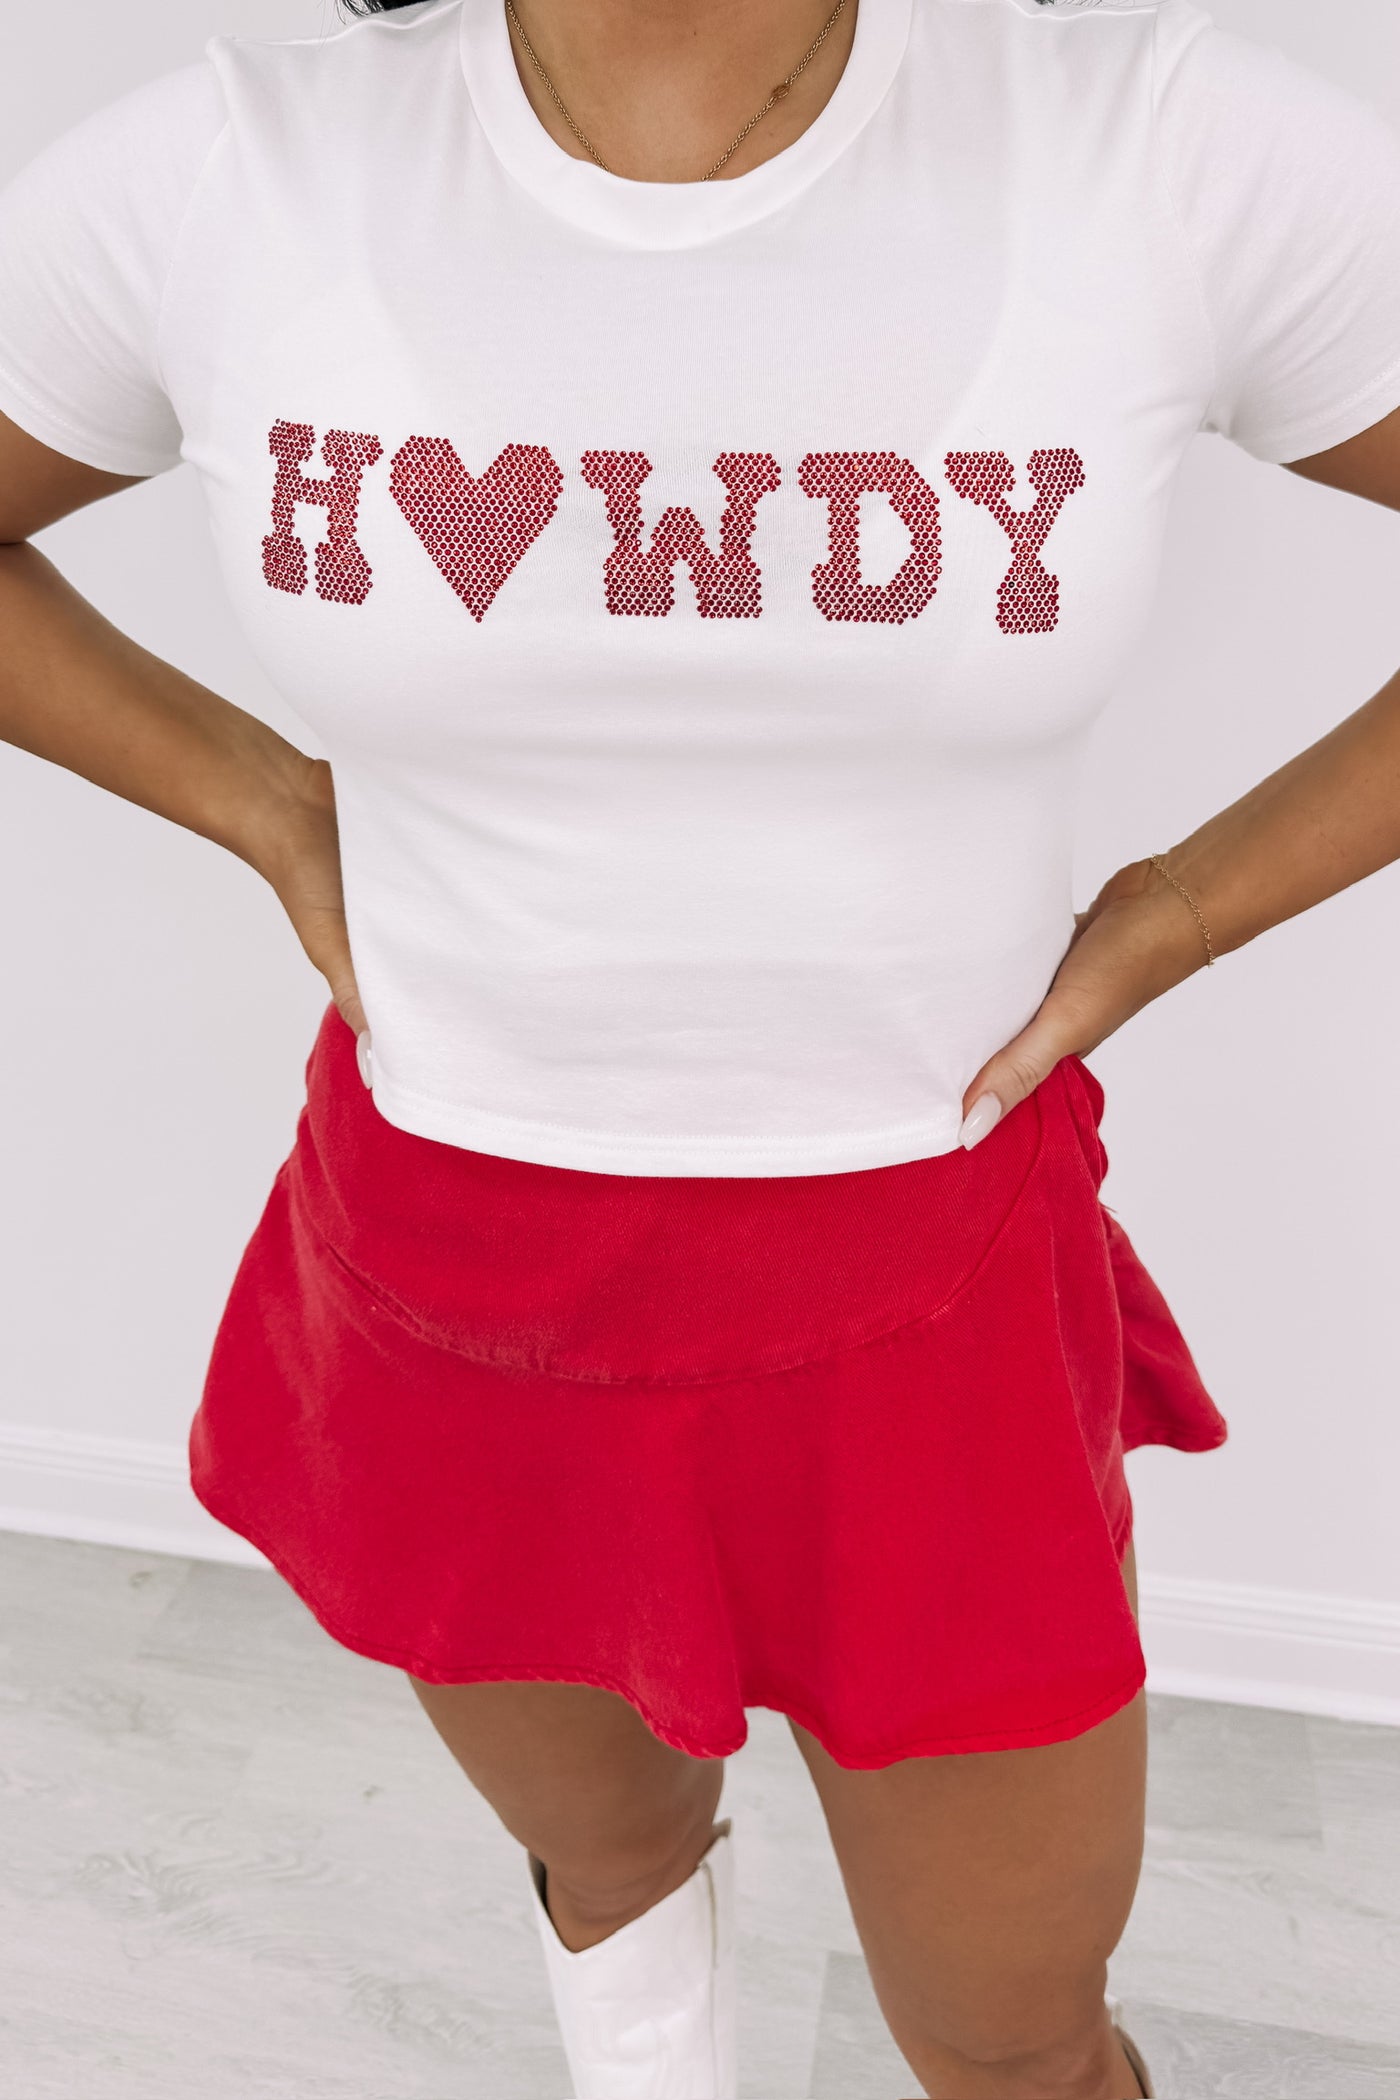 Cowgirl's Howdy Graphic Crop Top